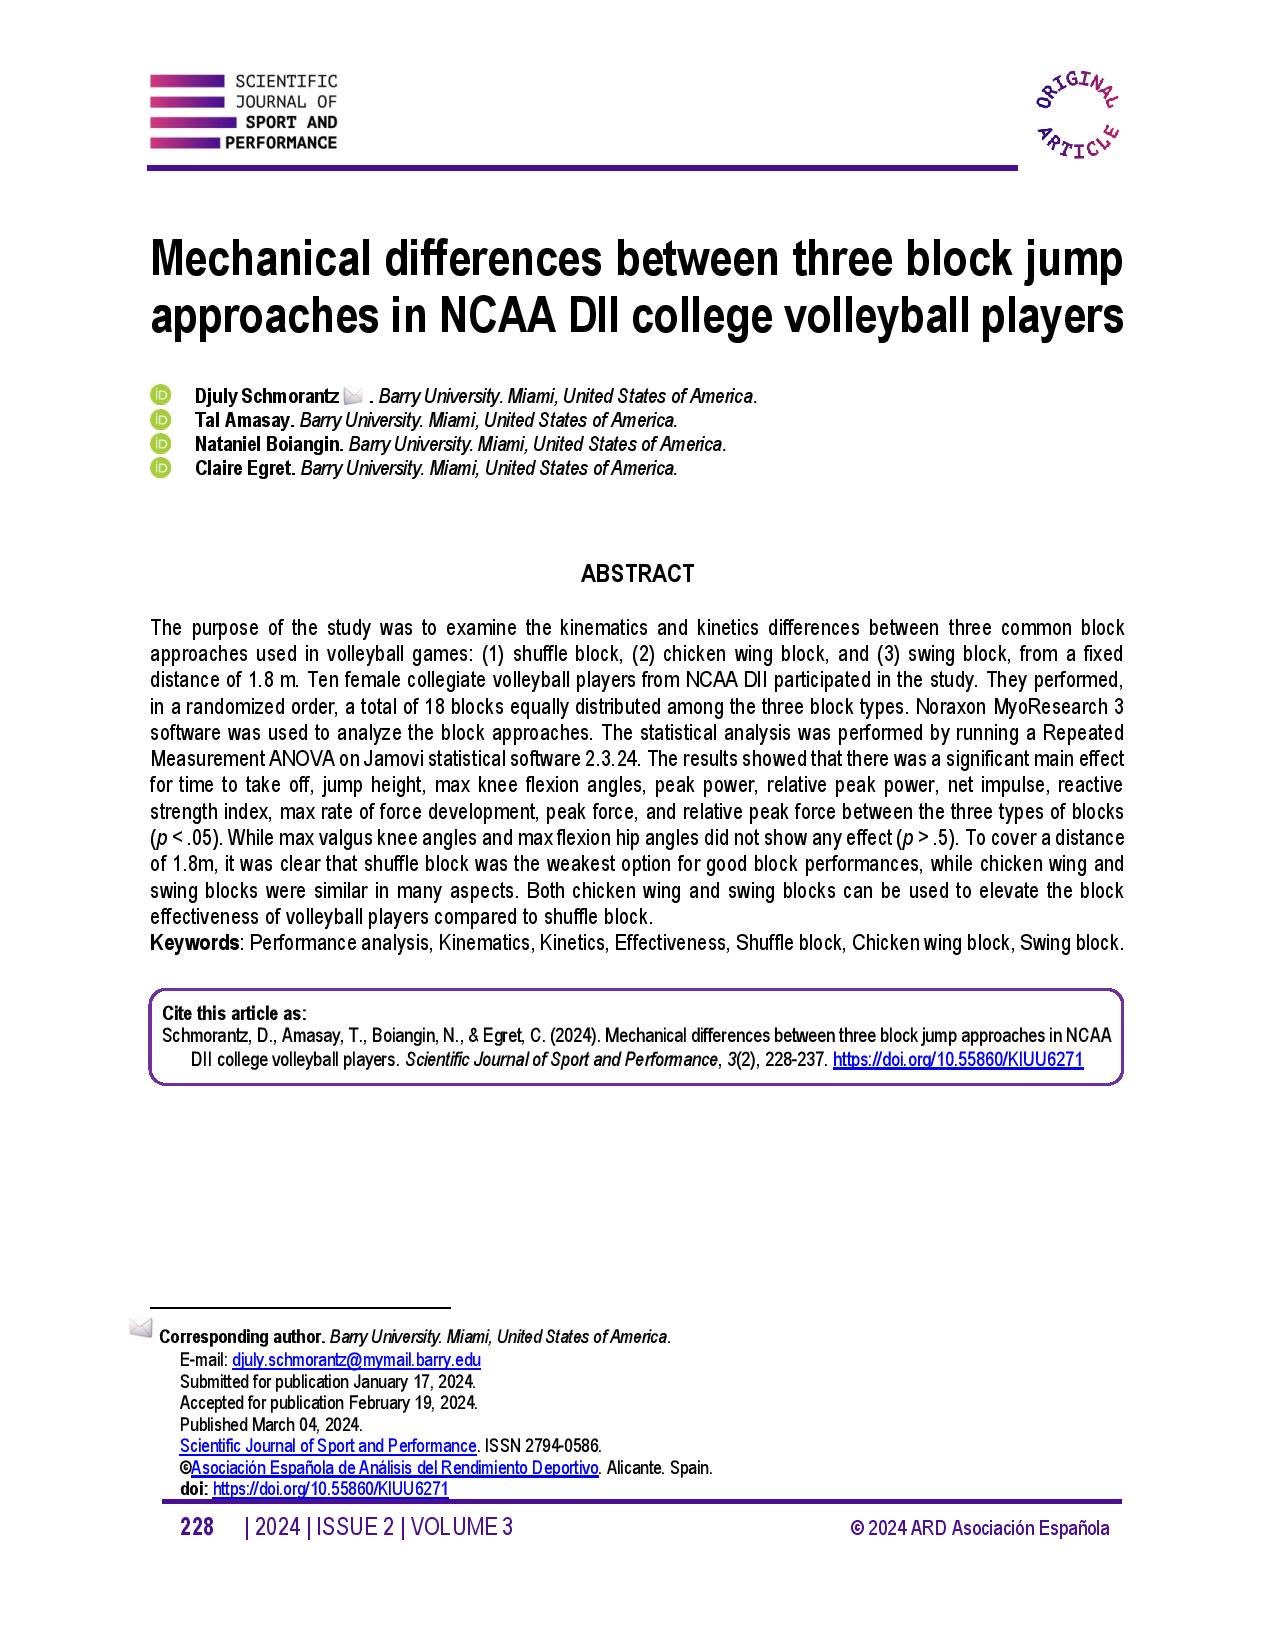 Mechanical differences between three block jump approaches in NCAA DII college volleyball players